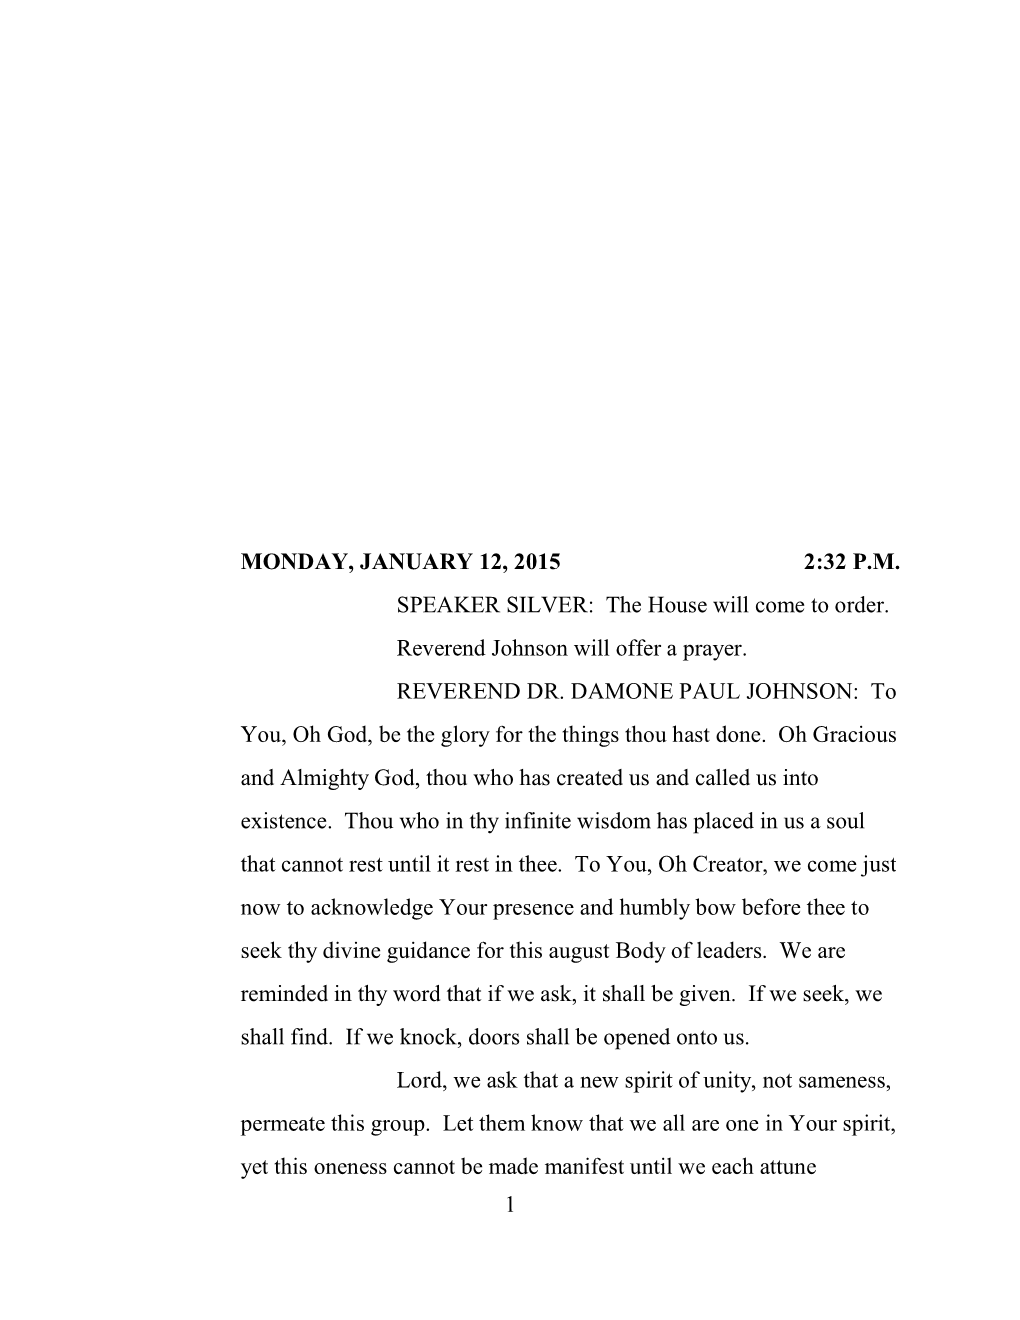 1 MONDAY, JANUARY 12, 2015 2:32 P.M. SPEAKER SILVER: the House Will Come to Order. Reverend Johnson Will Offer a Prayer. R